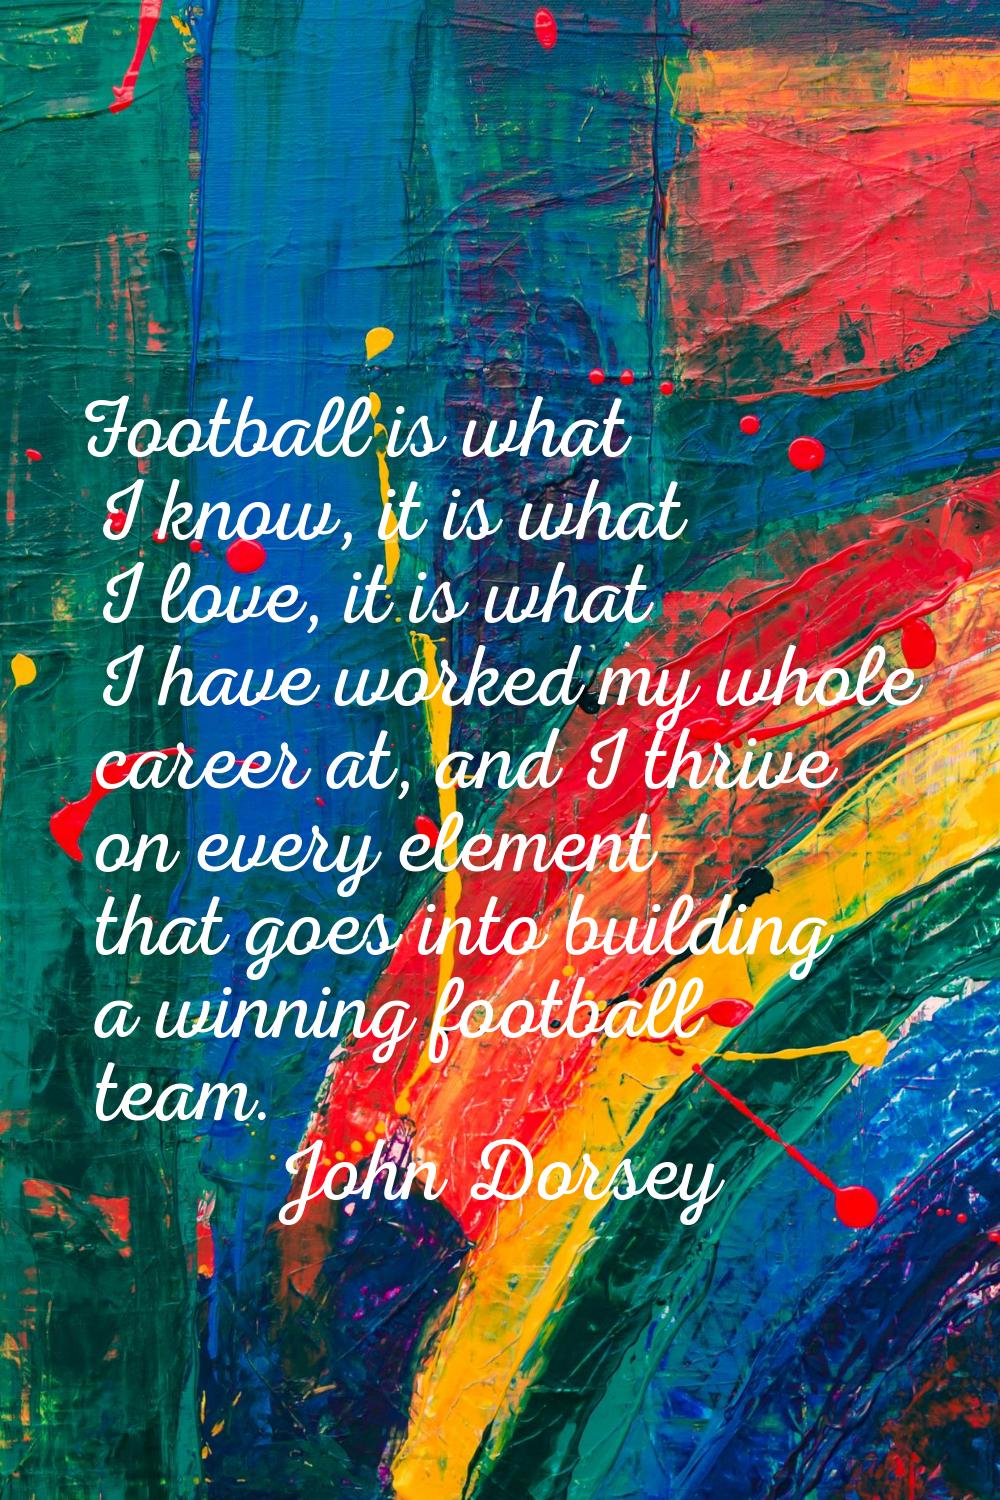 Football is what I know, it is what I love, it is what I have worked my whole career at, and I thri